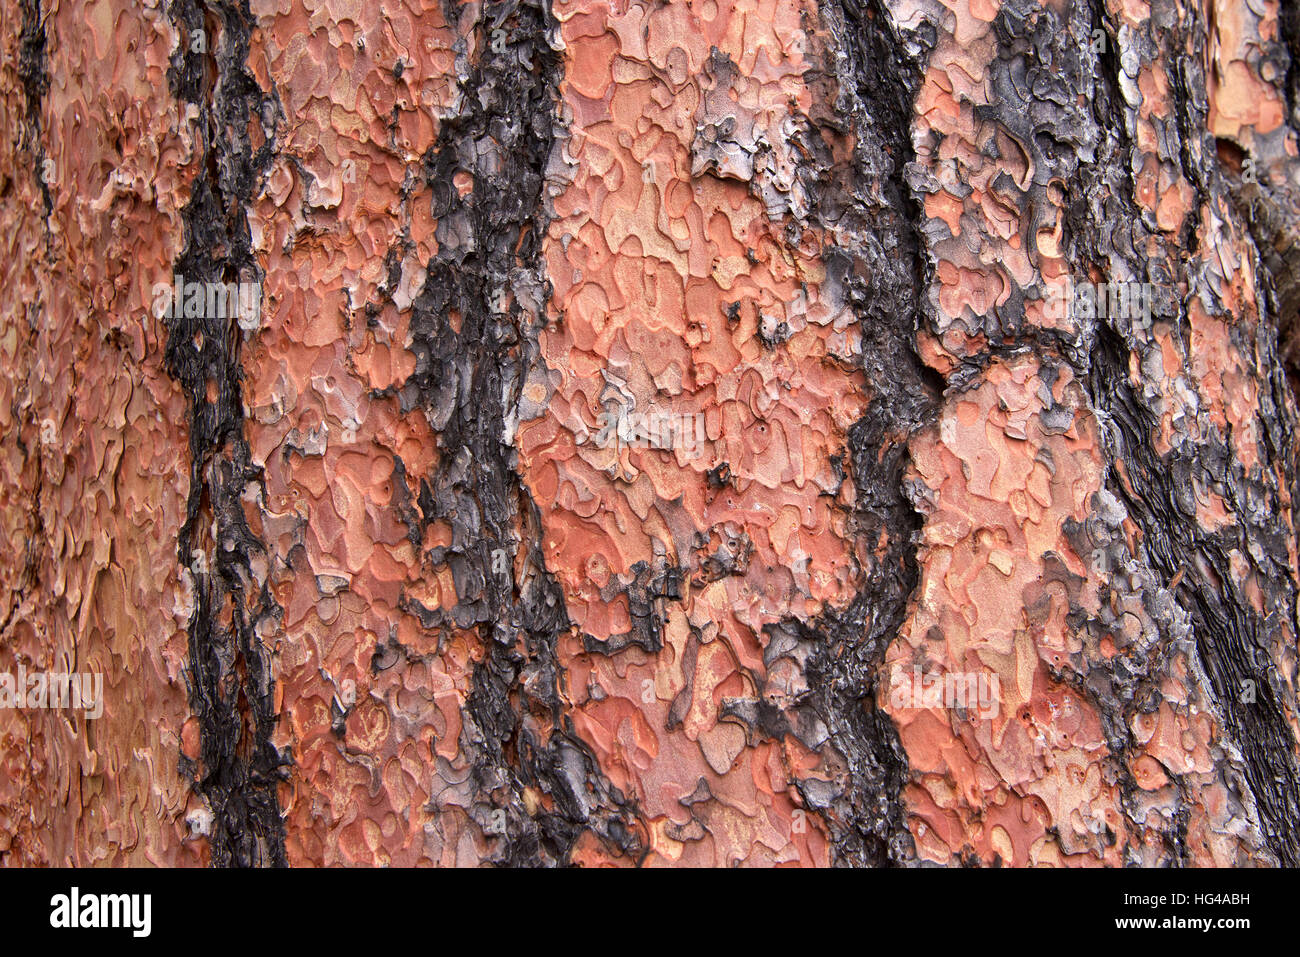 Close up of texture on trunk of a Ponderosa Pine tree in Flagstaff Arizona. Bark peeling in a unique puzzle formation Stock Photo